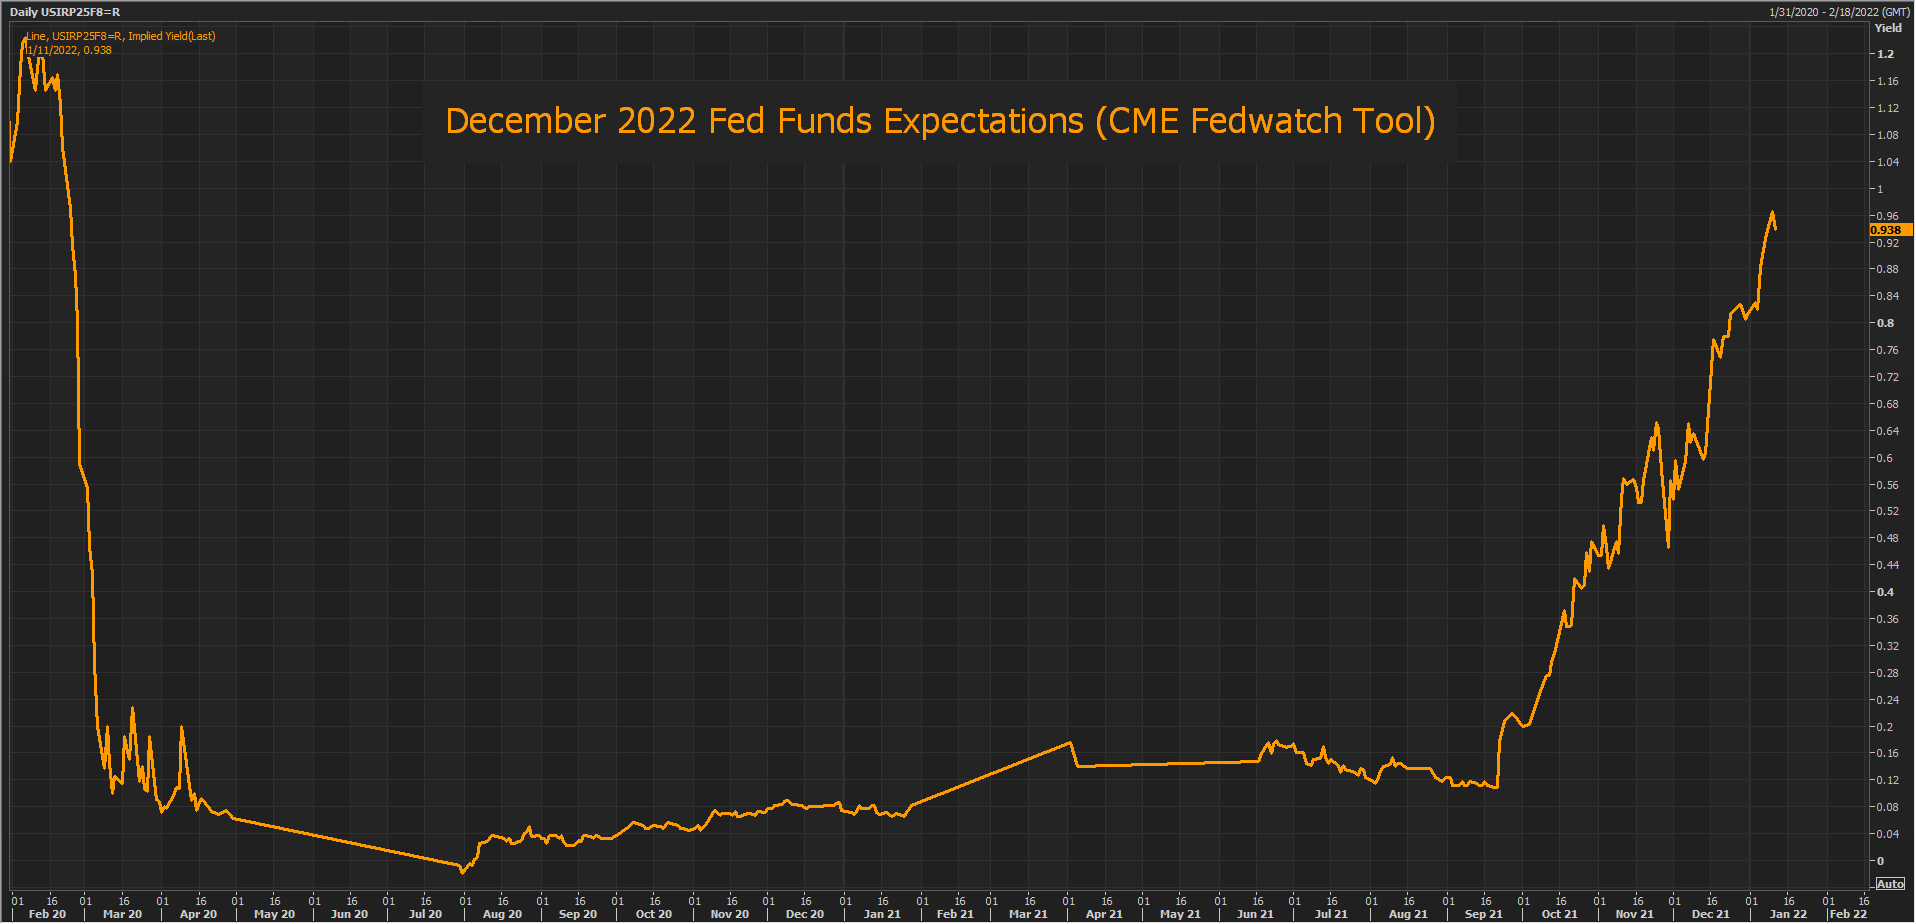 Fed Rate Expectations - Dec. 2022